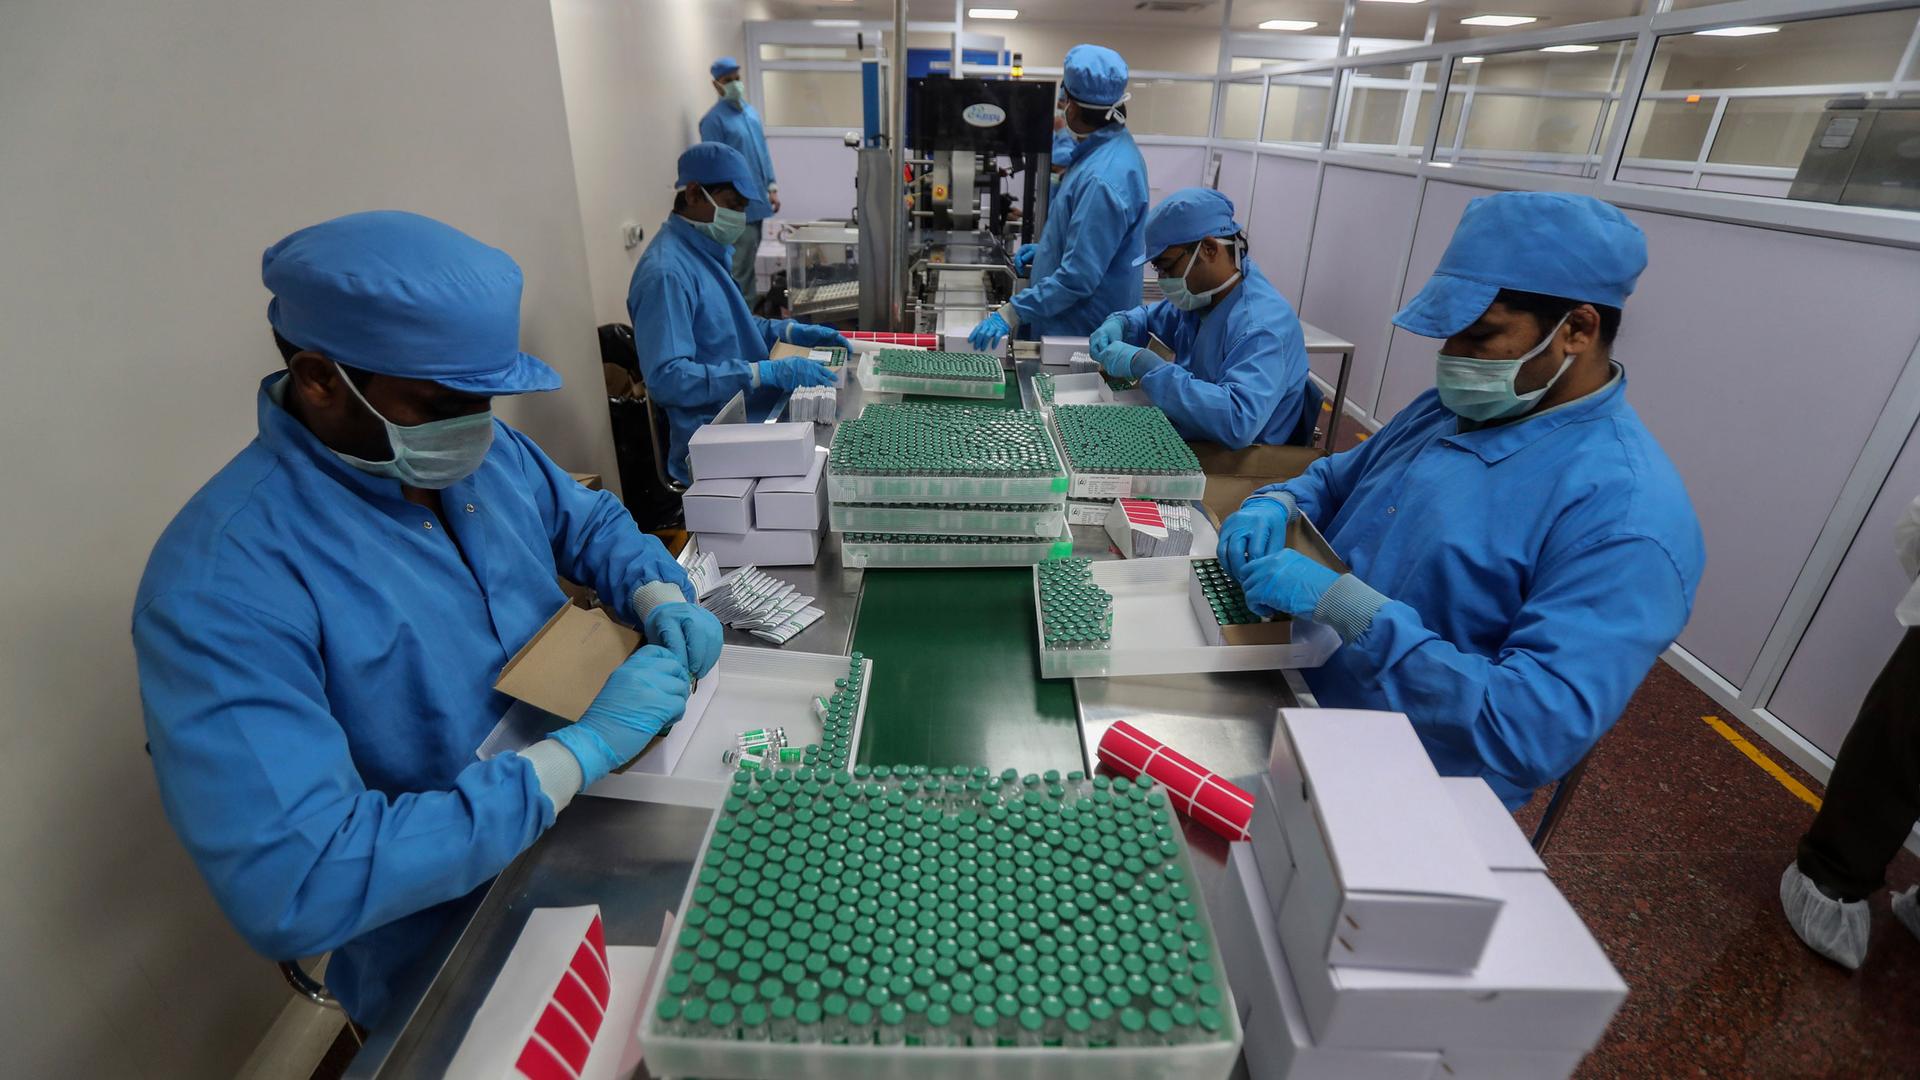 Several people are shown on either side of a long table wearing protective medical blue clothing and adding vials of COVID-19 vaccines to crates.